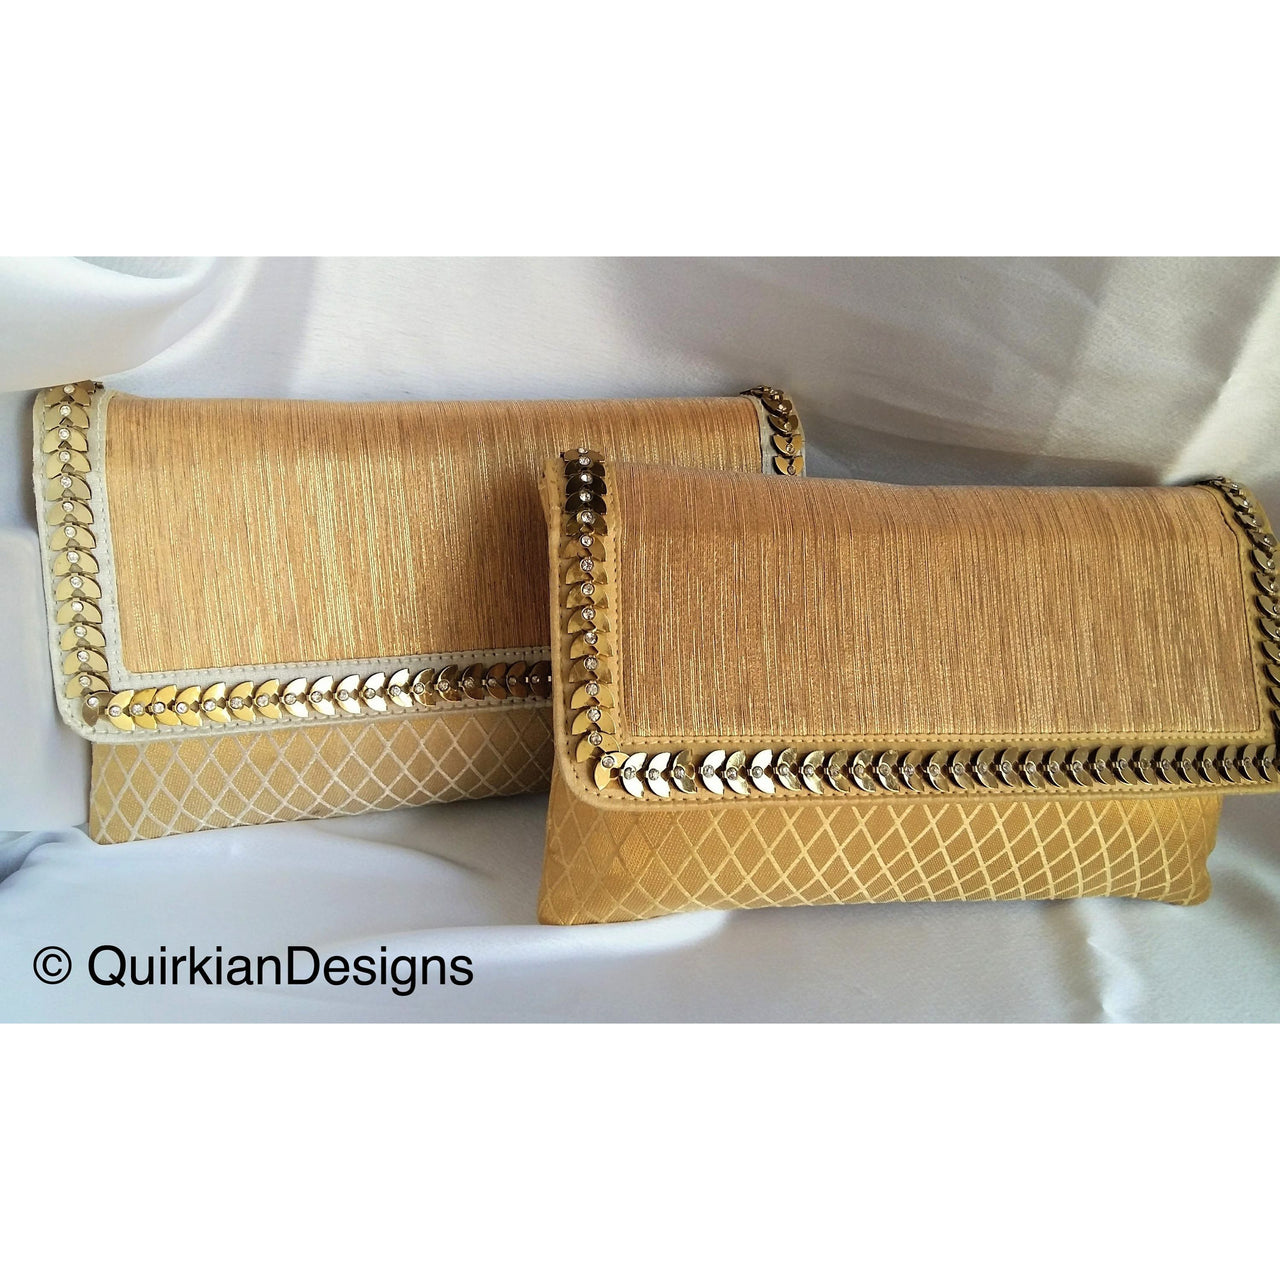 Beige, White And Copper Fabric Clutch Purse With Gold And Diamante Beads, Wedding Clutch, Party Bag